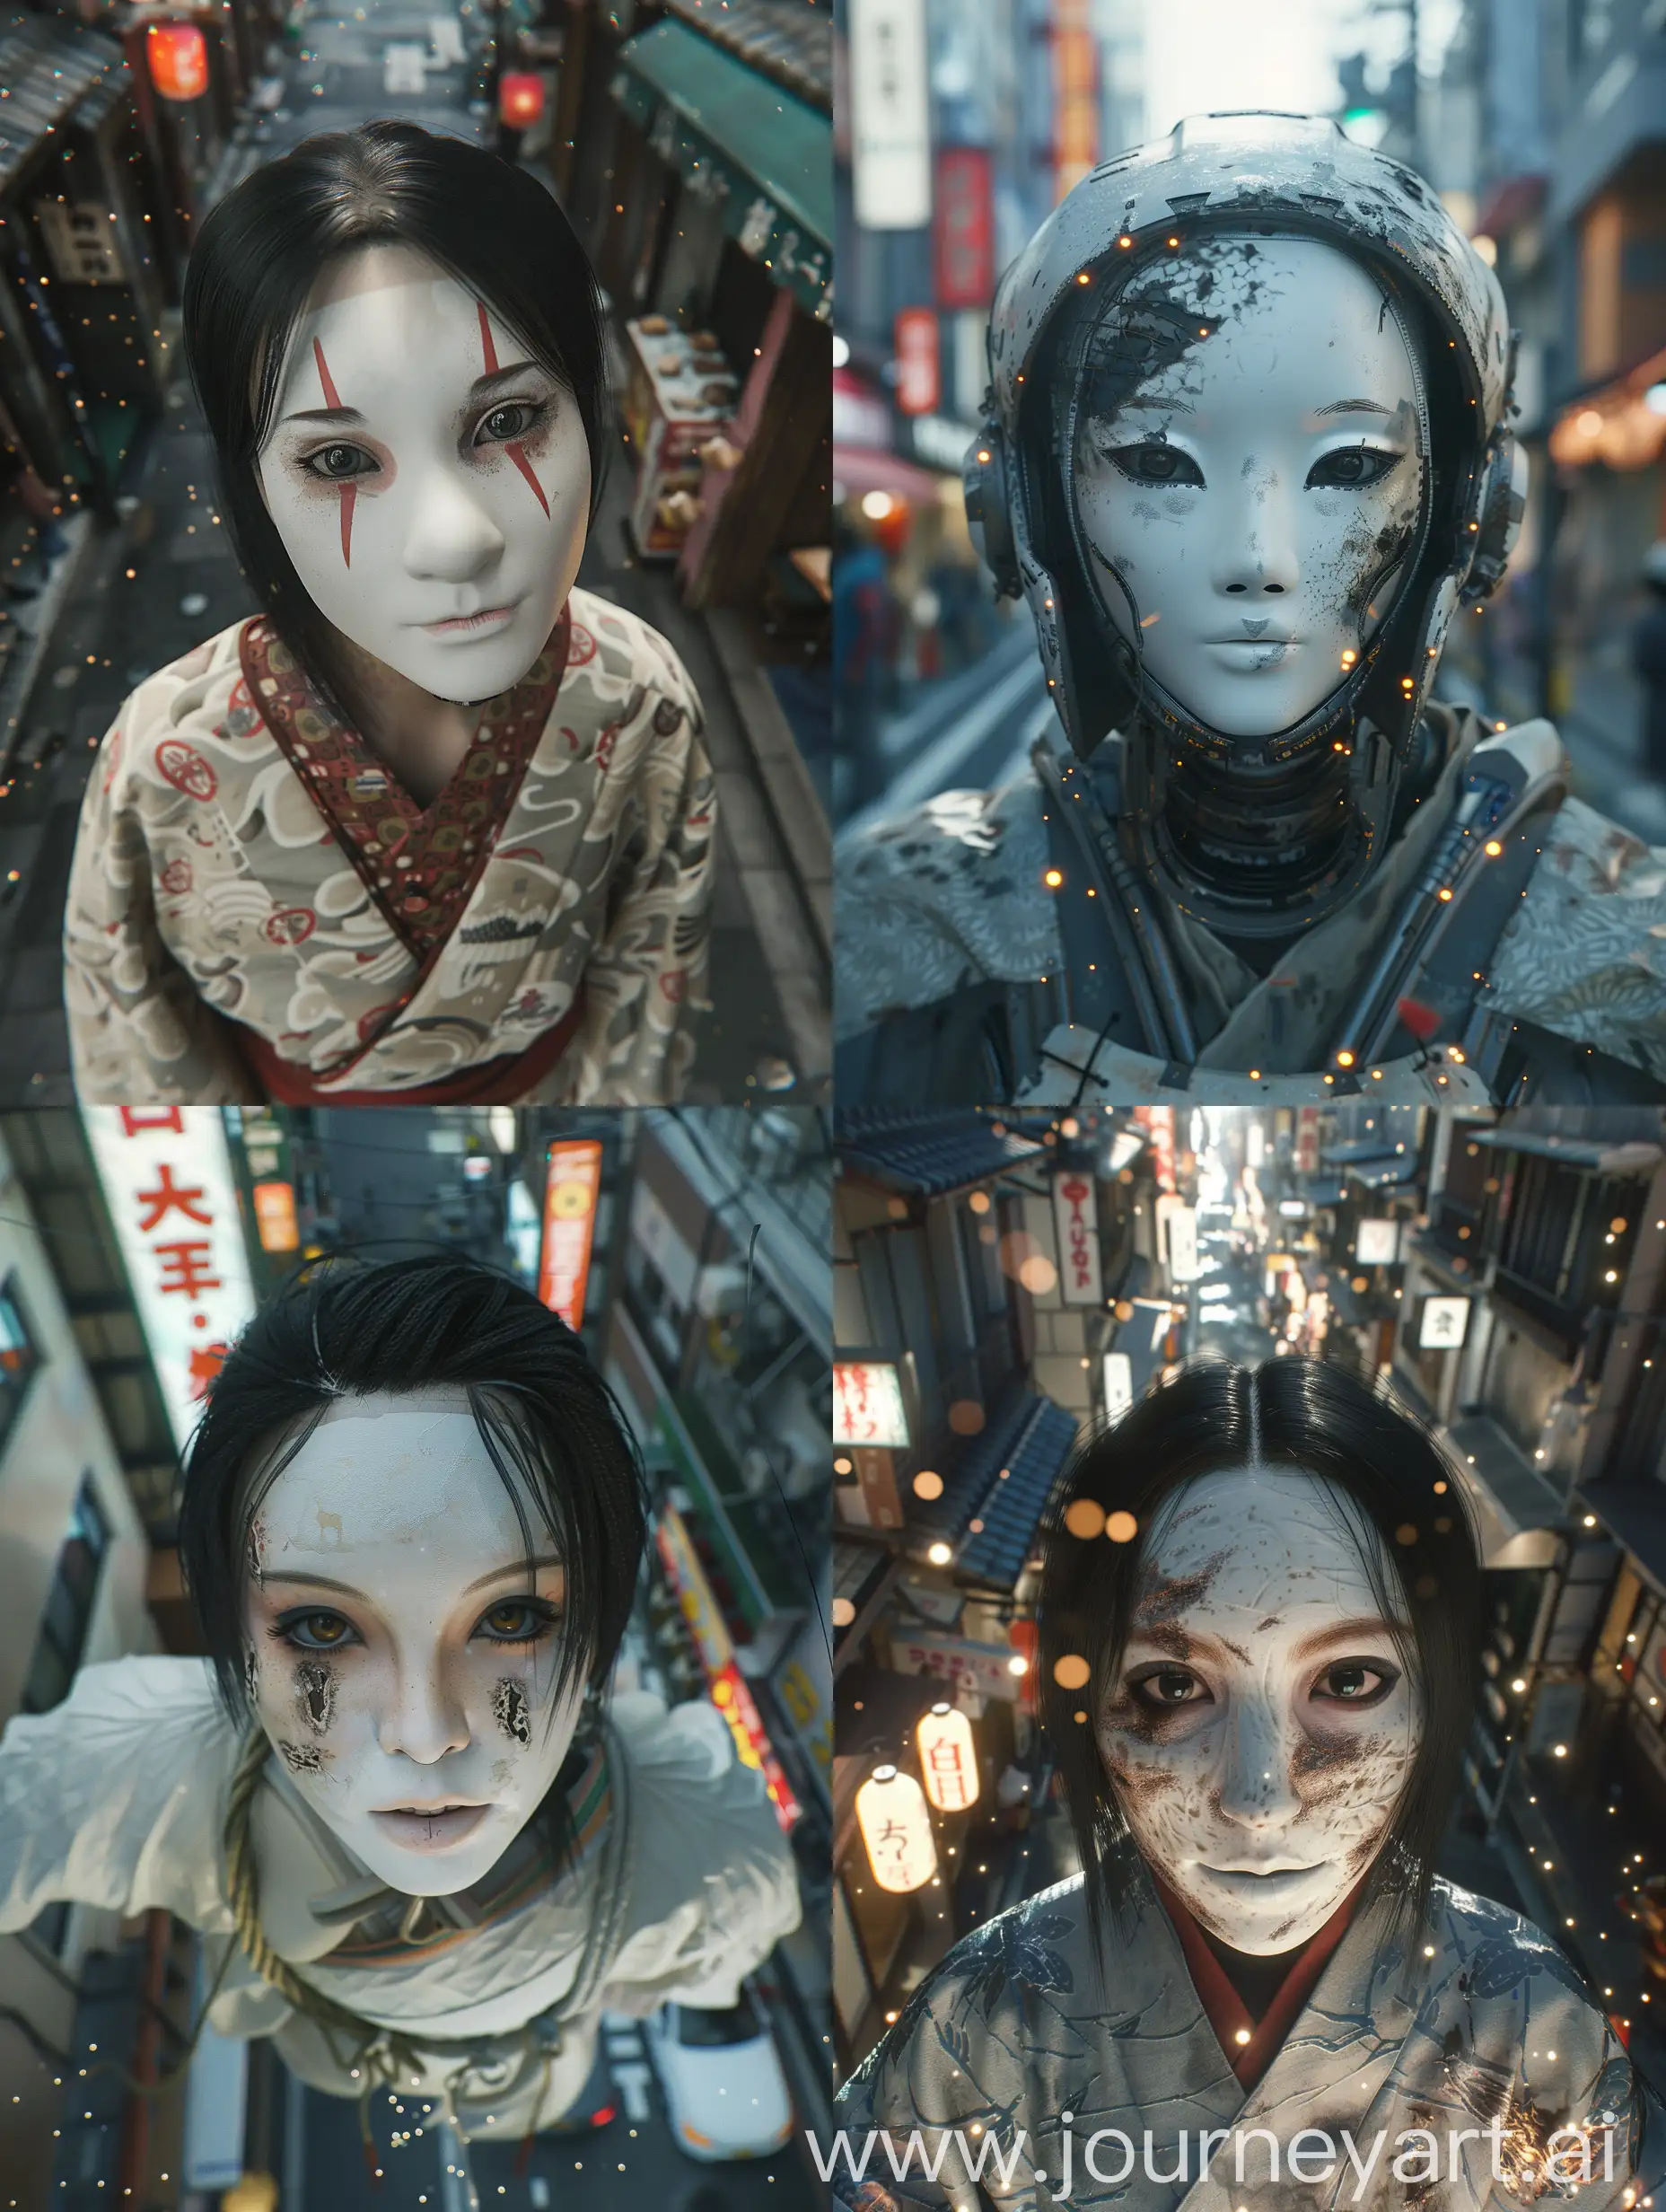 wide-angle lens, top-shot, f/11, 24mm lens, cinematic, realism, Using (((imagination))) to craft a photorealistic representation of an unusual fantasy dream, Cinematic shooting techniques and shooting angles, Describing Japanese yokai ((( samurai in futuristic world, white puppet mask,))) Shibuya-ku street, Amazing, shocking, Mysterious, Contrasty, gorgeous, gorgeous, decayed, ivory colors, Memphis, magic sparkles lighting, skillfully captured through an EE 70mm lens, providing a professional movie feel. The UHD camera captures every detail of this moment, highlighting the colors and textures. Render her in a photorealistic style, cinematic, capturing the fine details of her features and surroundings. Pay close attention to realistic skin tones, textures, and lighting conditions. Ensure the image is in high resolution, such as 8K, to showcase the intricate details and allo
